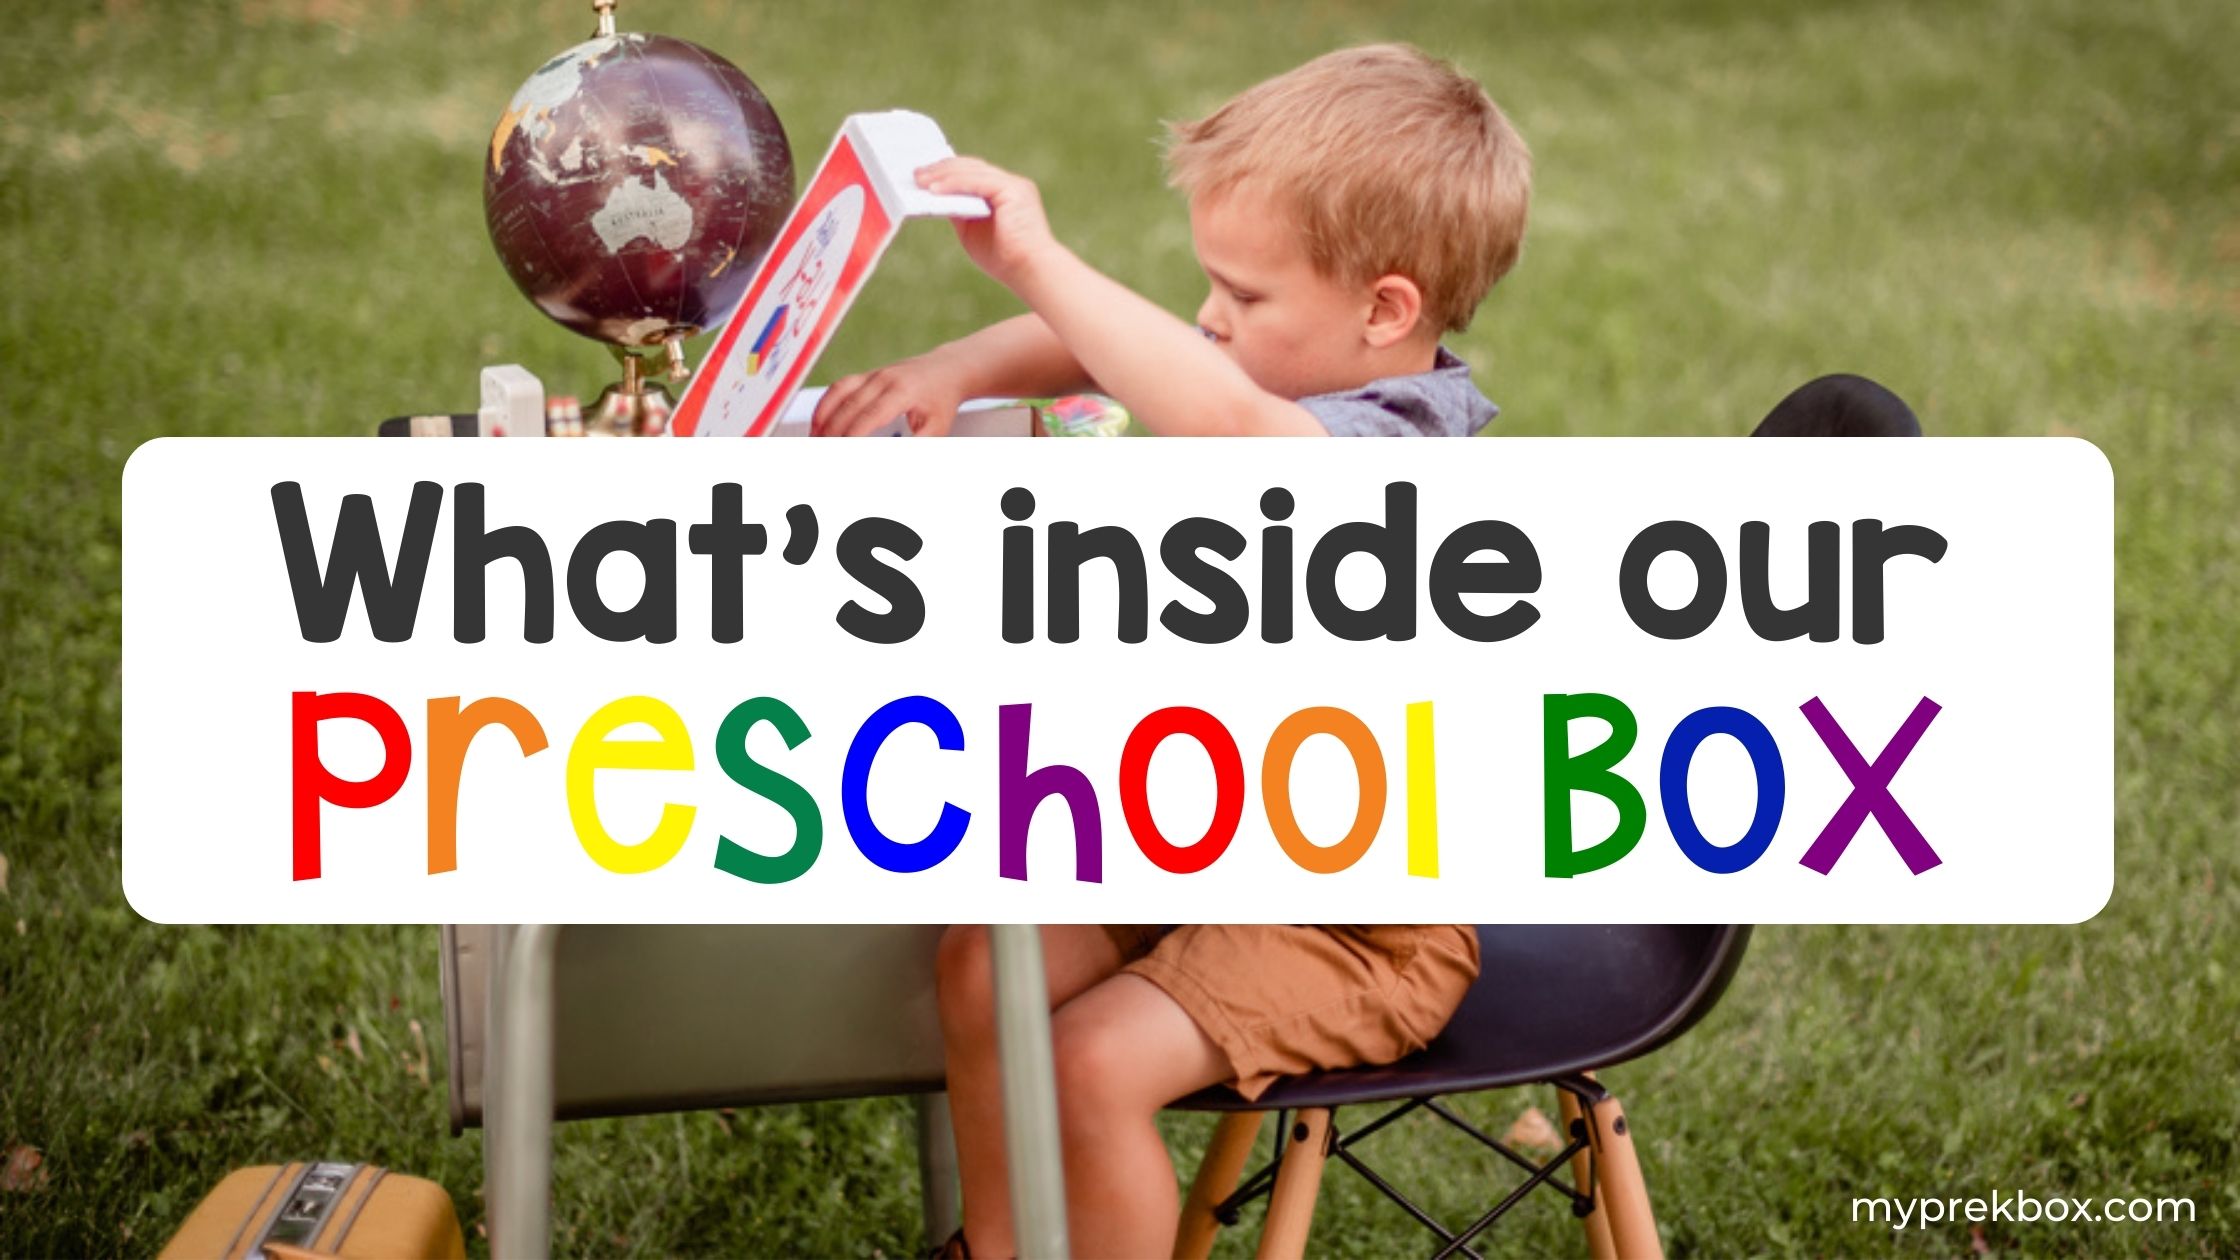 What You Will Find Inside Our Preschool Box!